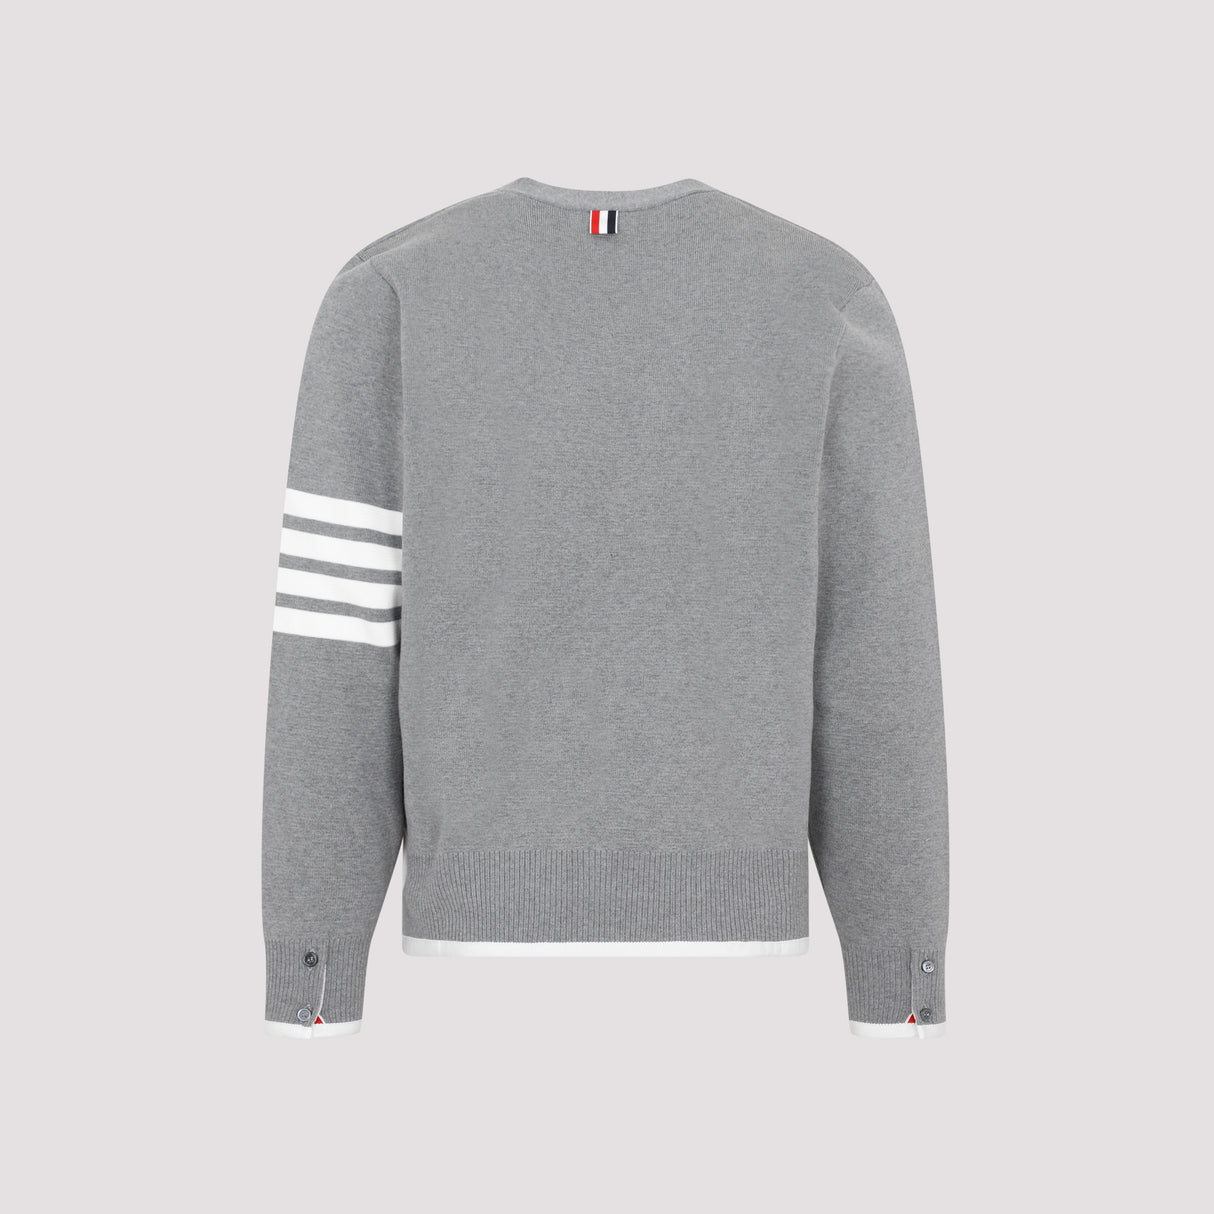 THOM BROWNE Grey Striped Cotton Cardigan for Men in Asymmetrical Style